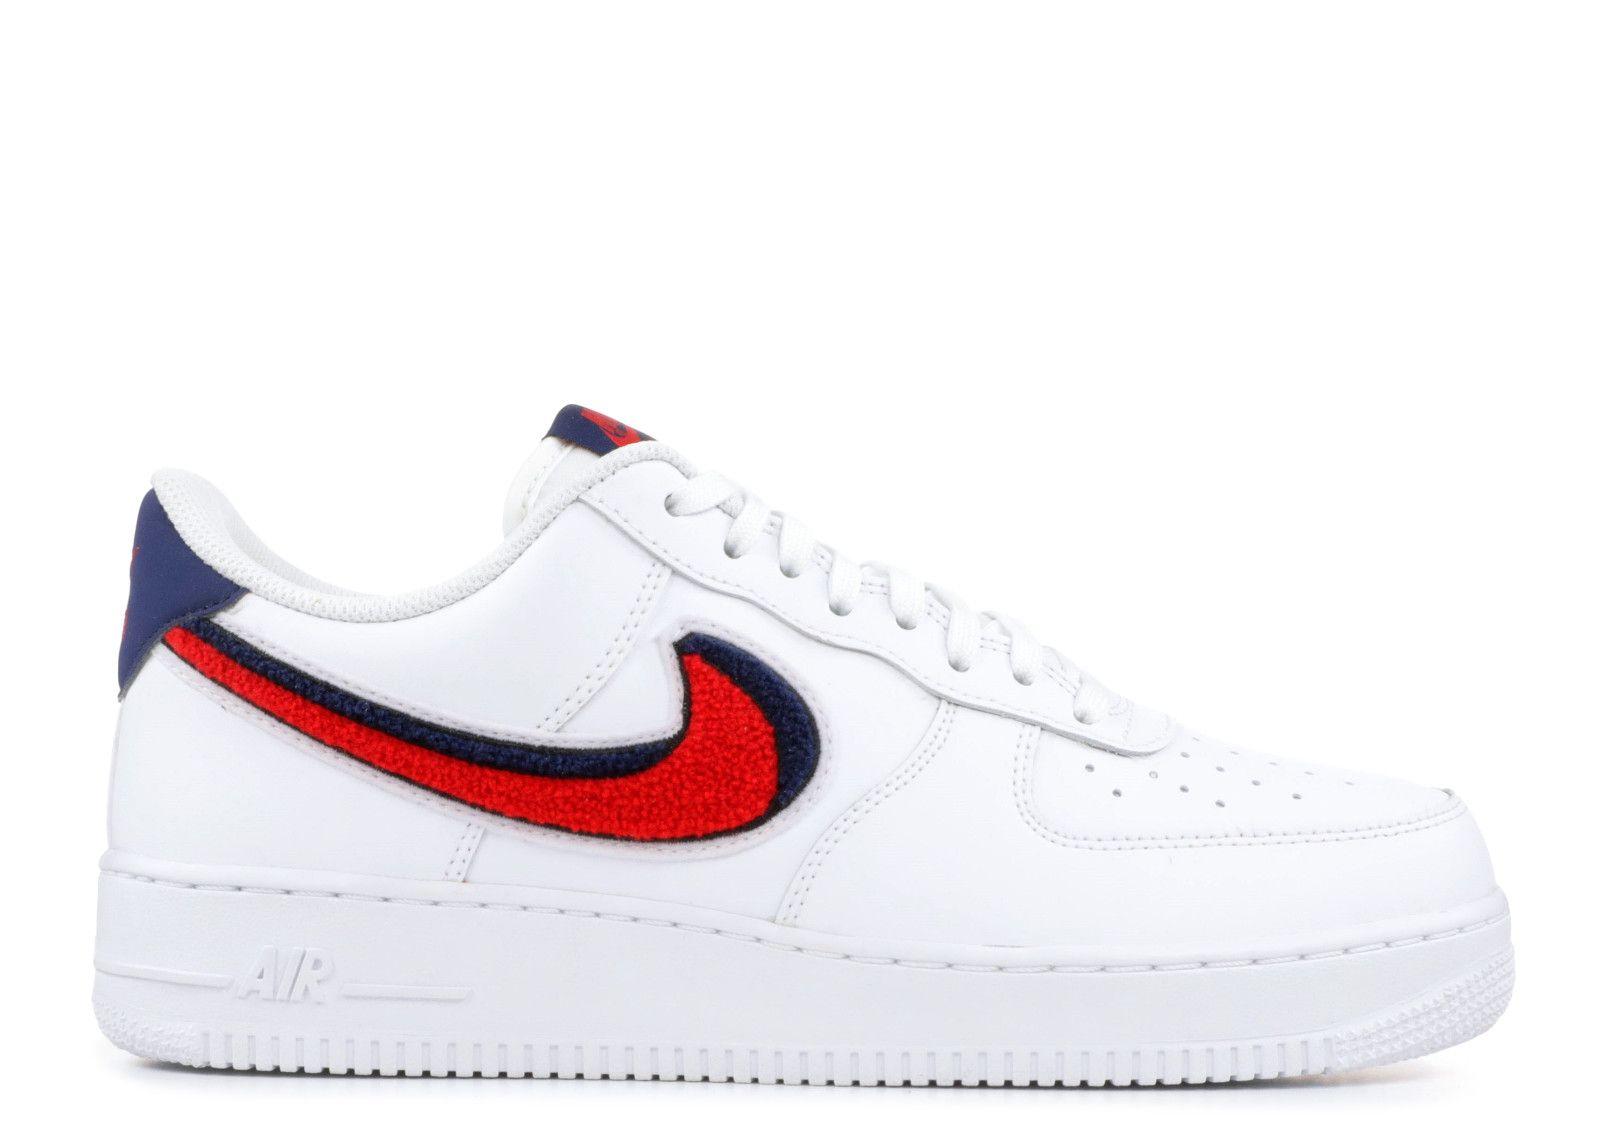 Red White and Blue Nike Logo - Air Force 1 07 LV8 